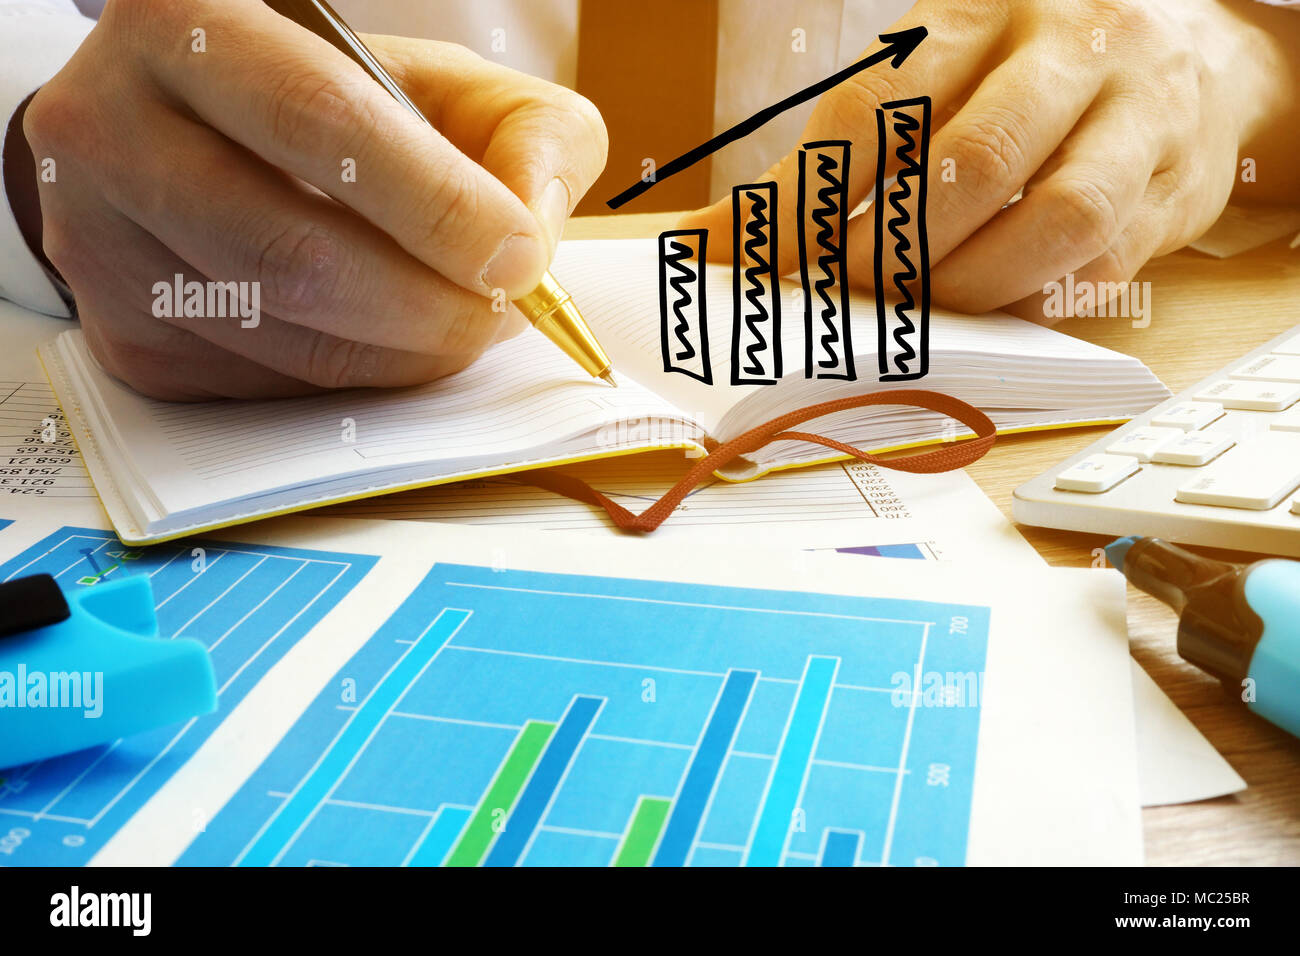 Business growing concept. Businessman analyze financial results. Stock Photo